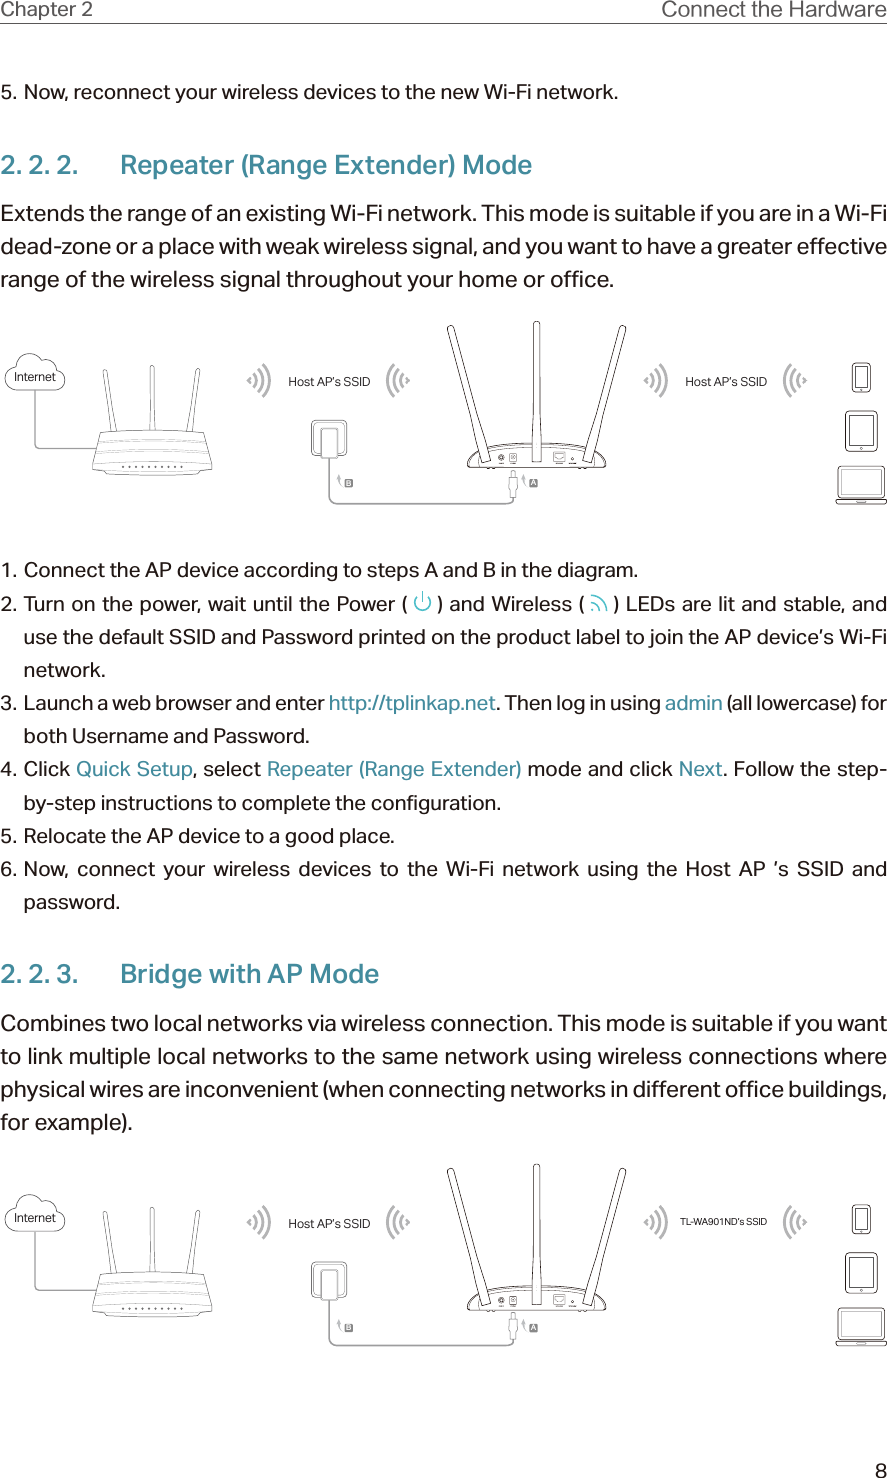 8Chapter 2 $POOFDUUIF)BSEXBSF5. Now, reconnect your wireless devices to the new Wi-Fi network.2. 2. 2.  Repeater (Range Extender) ModeExtends the range of an existing Wi-Fi network. This mode is suitable if you are in a Wi-Fi dead-zone or a place with weak wireless signal, and you want to have a greater effective range of the wireless signal throughout your home or office.Internet Host AP’s SSID Host AP’s SSIDAB1. Connect the AP device according to steps A and B in the diagram.2. Turn on the power, wait until the Power (   ) and Wireless (   ) LEDs are lit and stable, and use the default SSID and Password printed on the product label to join the AP device’s Wi-Fi network.3.  Launch a web browser and enter http://tplinkap.net. Then log in using admin (all lowercase) for both Username and Password.4. Click Quick Setup, select Repeater (Range Extender) mode and click Next. Follow the step-by-step instructions to complete the configuration.5. Relocate the AP device to a good place. 6. Now, connect your wireless devices to the Wi-Fi network using the Host AP ’s SSID and password.2. 2. 3.  Bridge with AP ModeCombines two local networks via wireless connection. This mode is suitable if you want to link multiple local networks to the same network using wireless connections where physical wires are inconvenient (when connecting networks in different office buildings, for example).InternetTL-WA901ND’s SSIDHost AP’s SSIDON/OFF POWER ETHERNET WPS/RESETAB